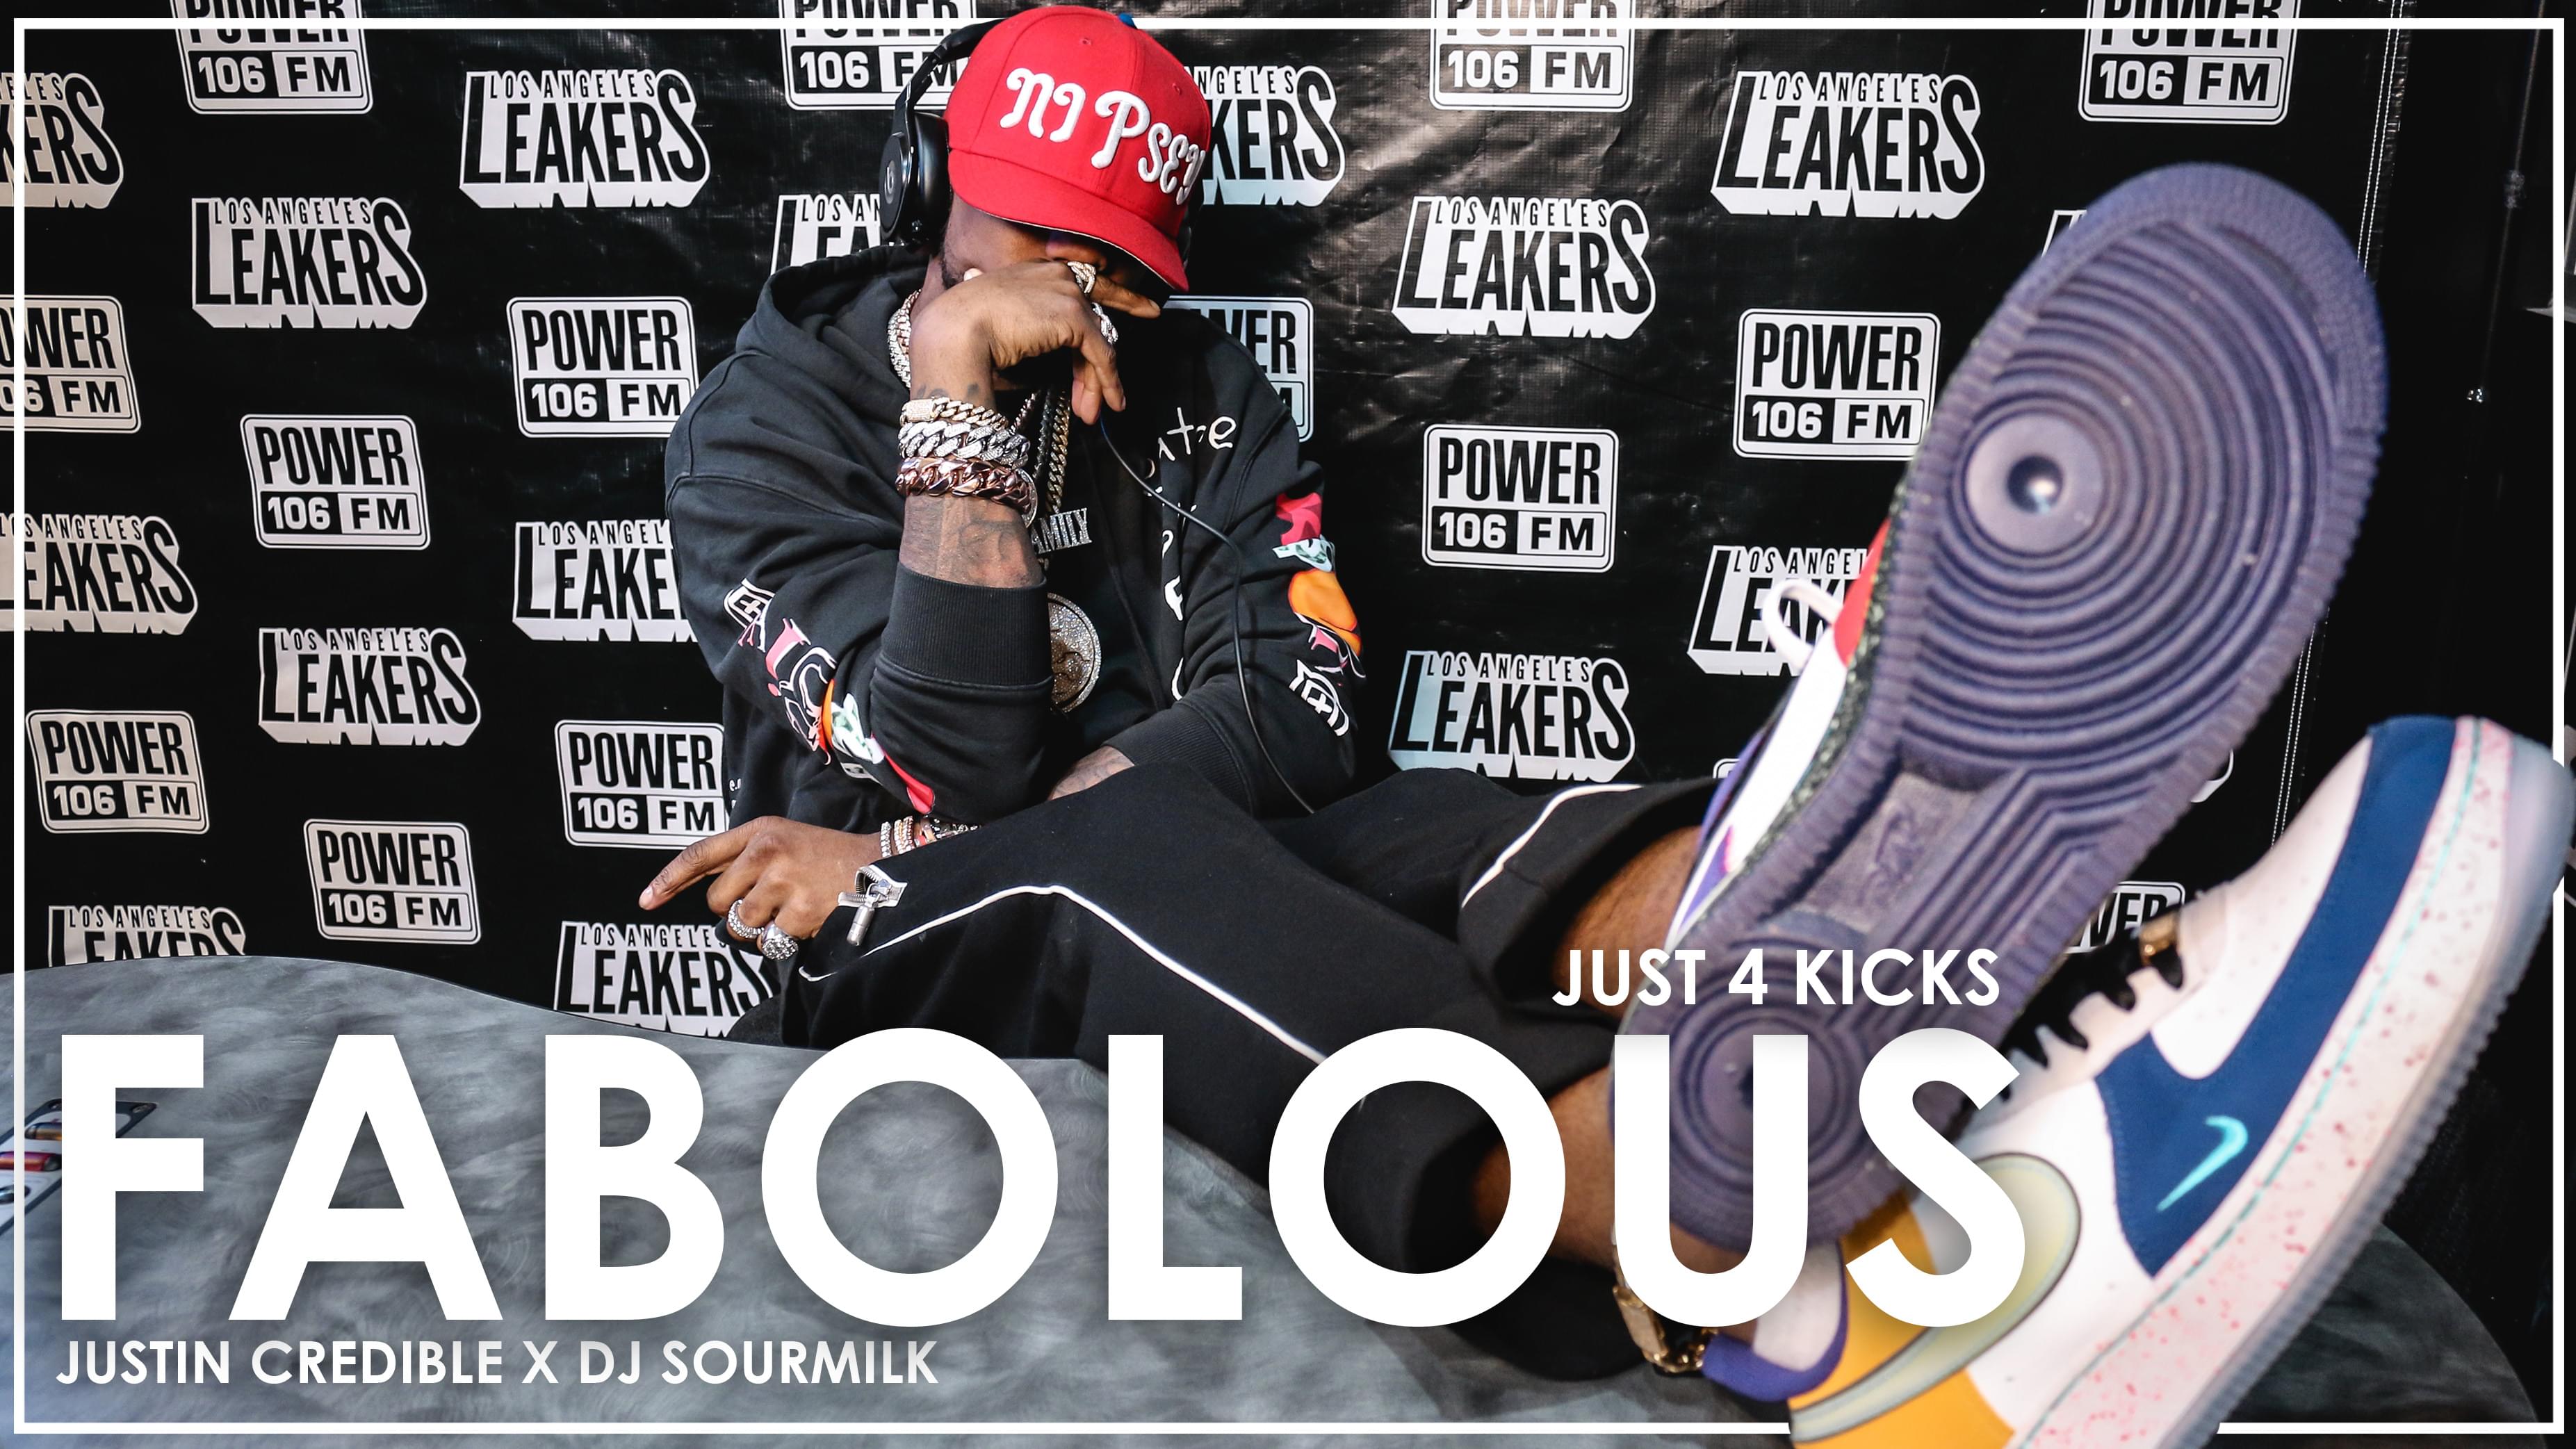 “Just 4 Kicks” Justin Credible Talks To Fabolous About His Favorite Sneakers [WATCH]